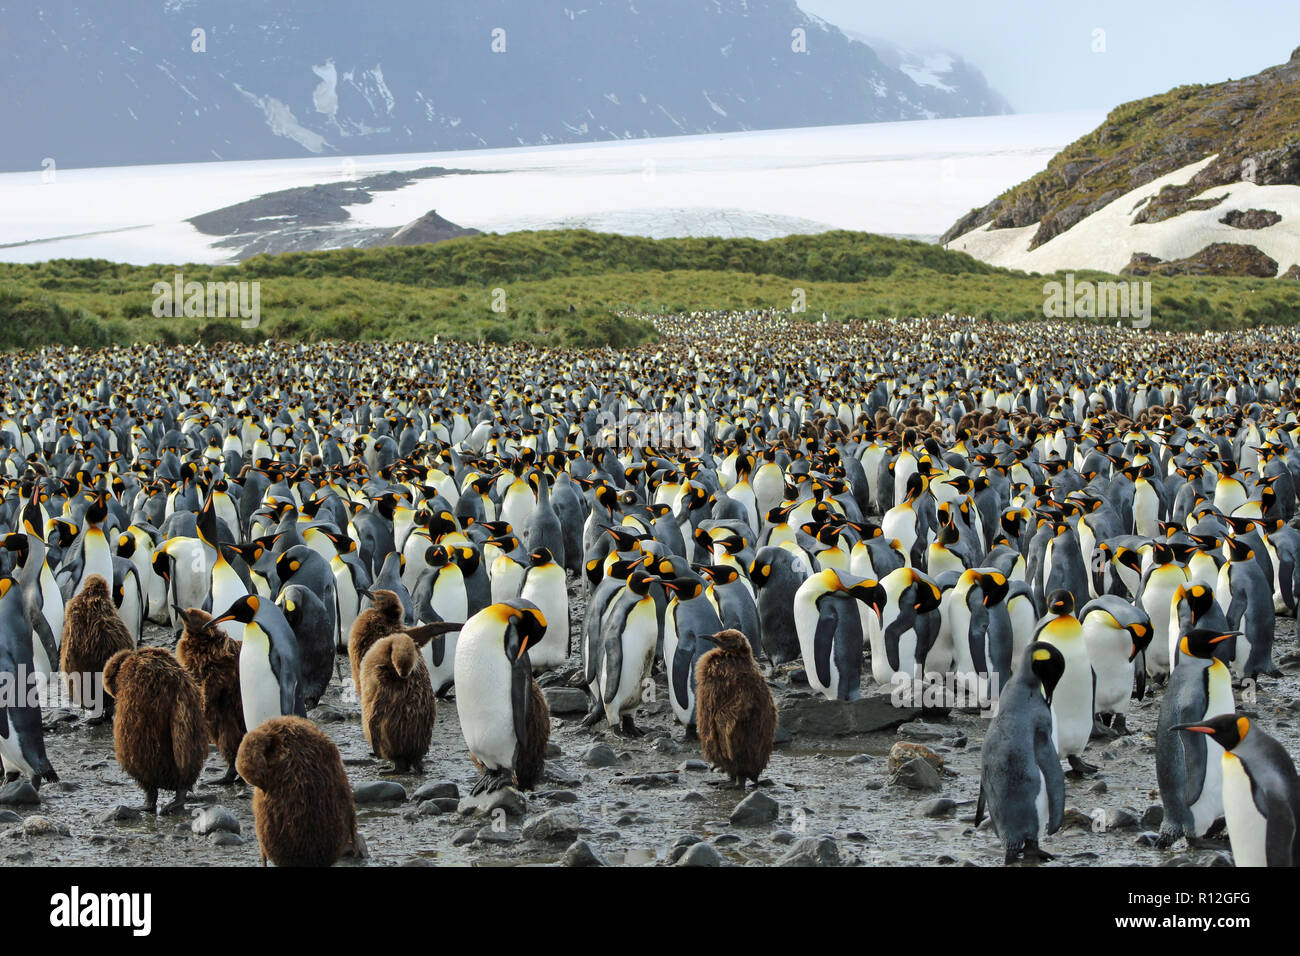 King Penguin Colony With Glacier In Background At St Andrews Bay South Georgia One Of The World S Largest Colonies With Over 100 000 Birds Stock Photo Alamy